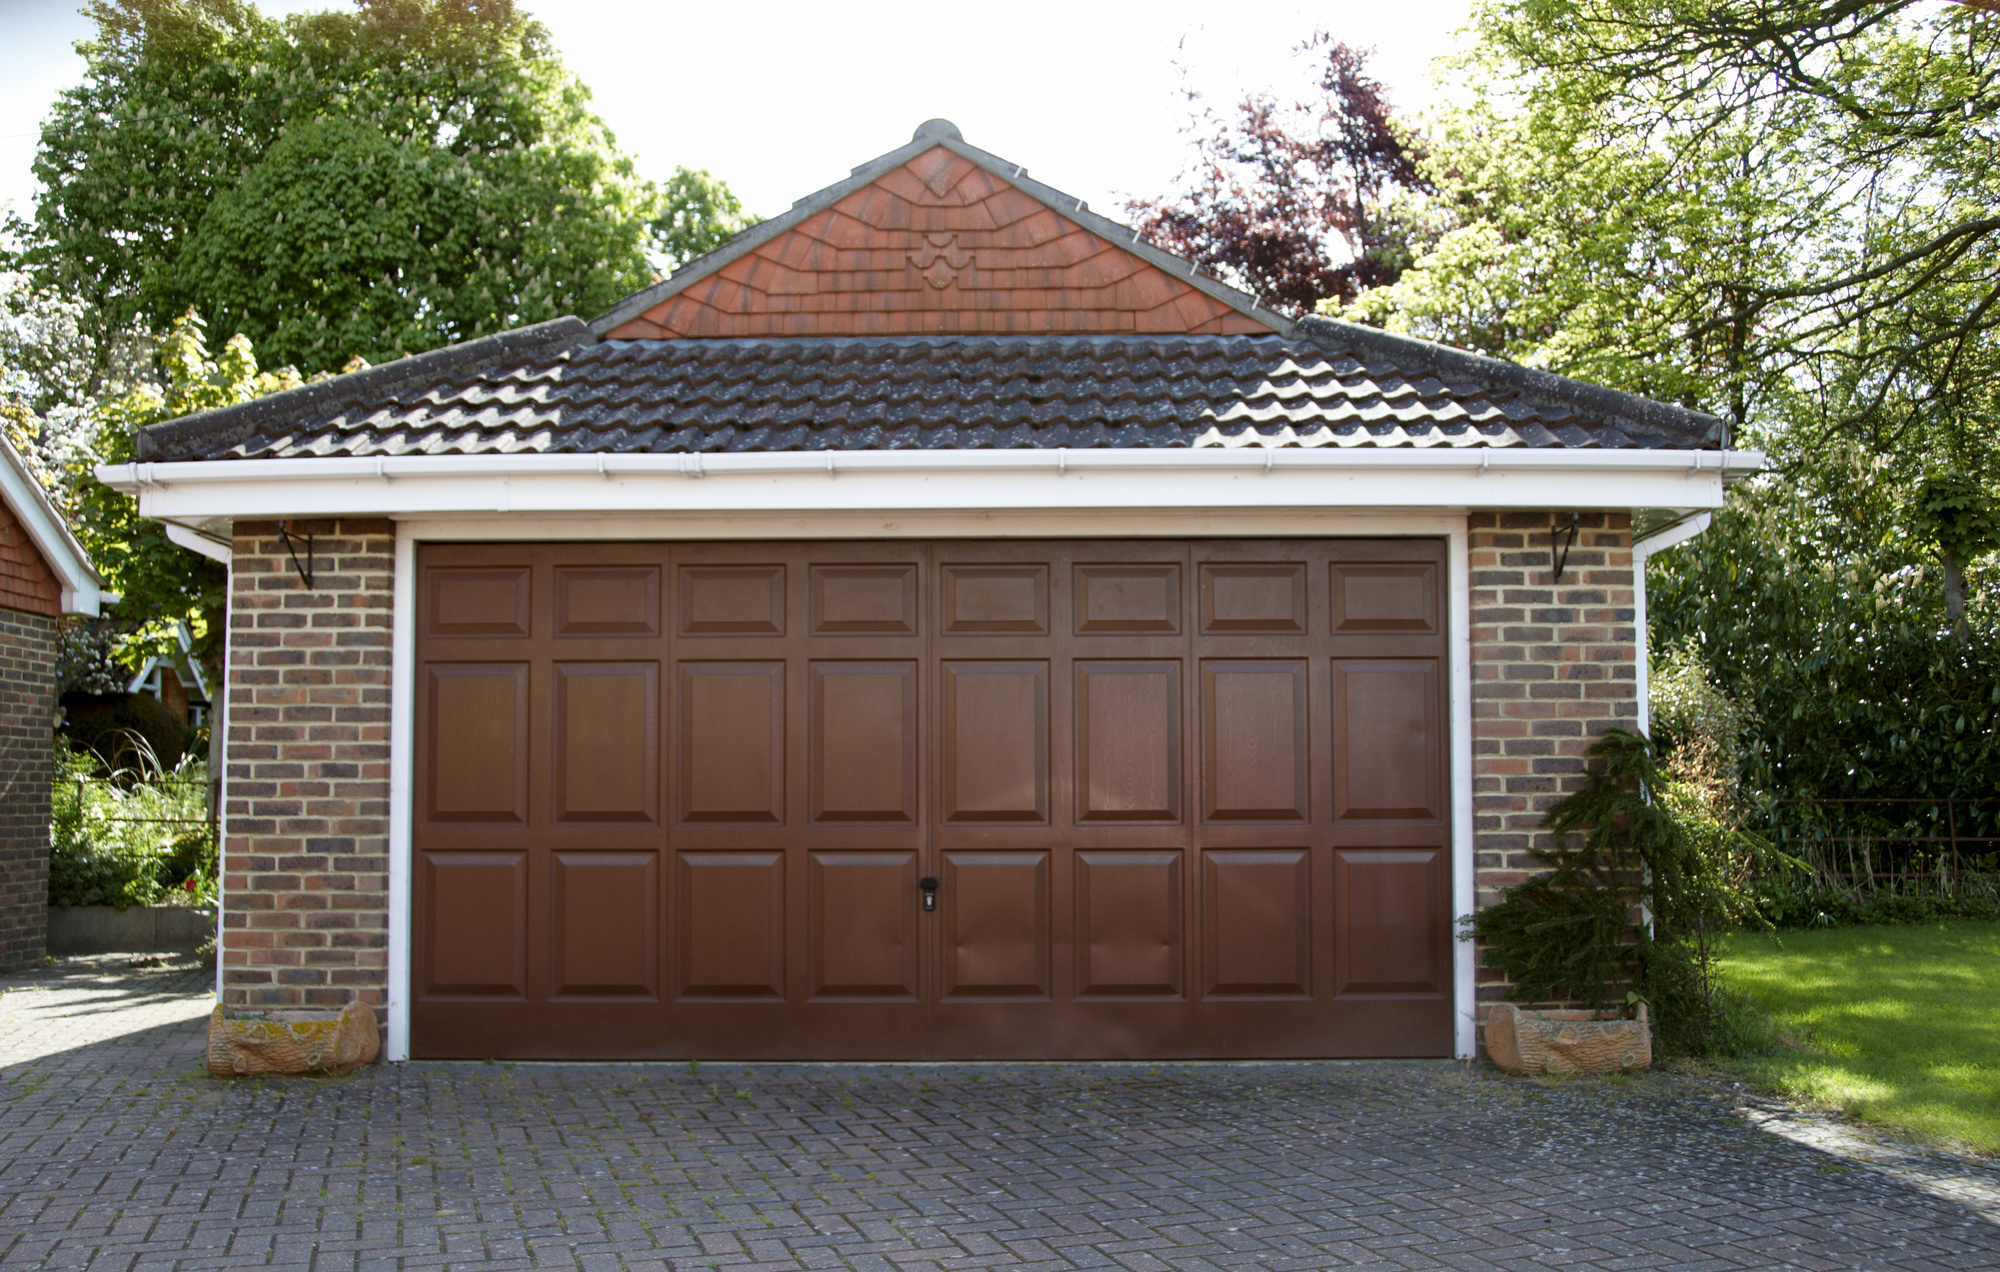 What Are the Most Effective Materials for Garage Construction?